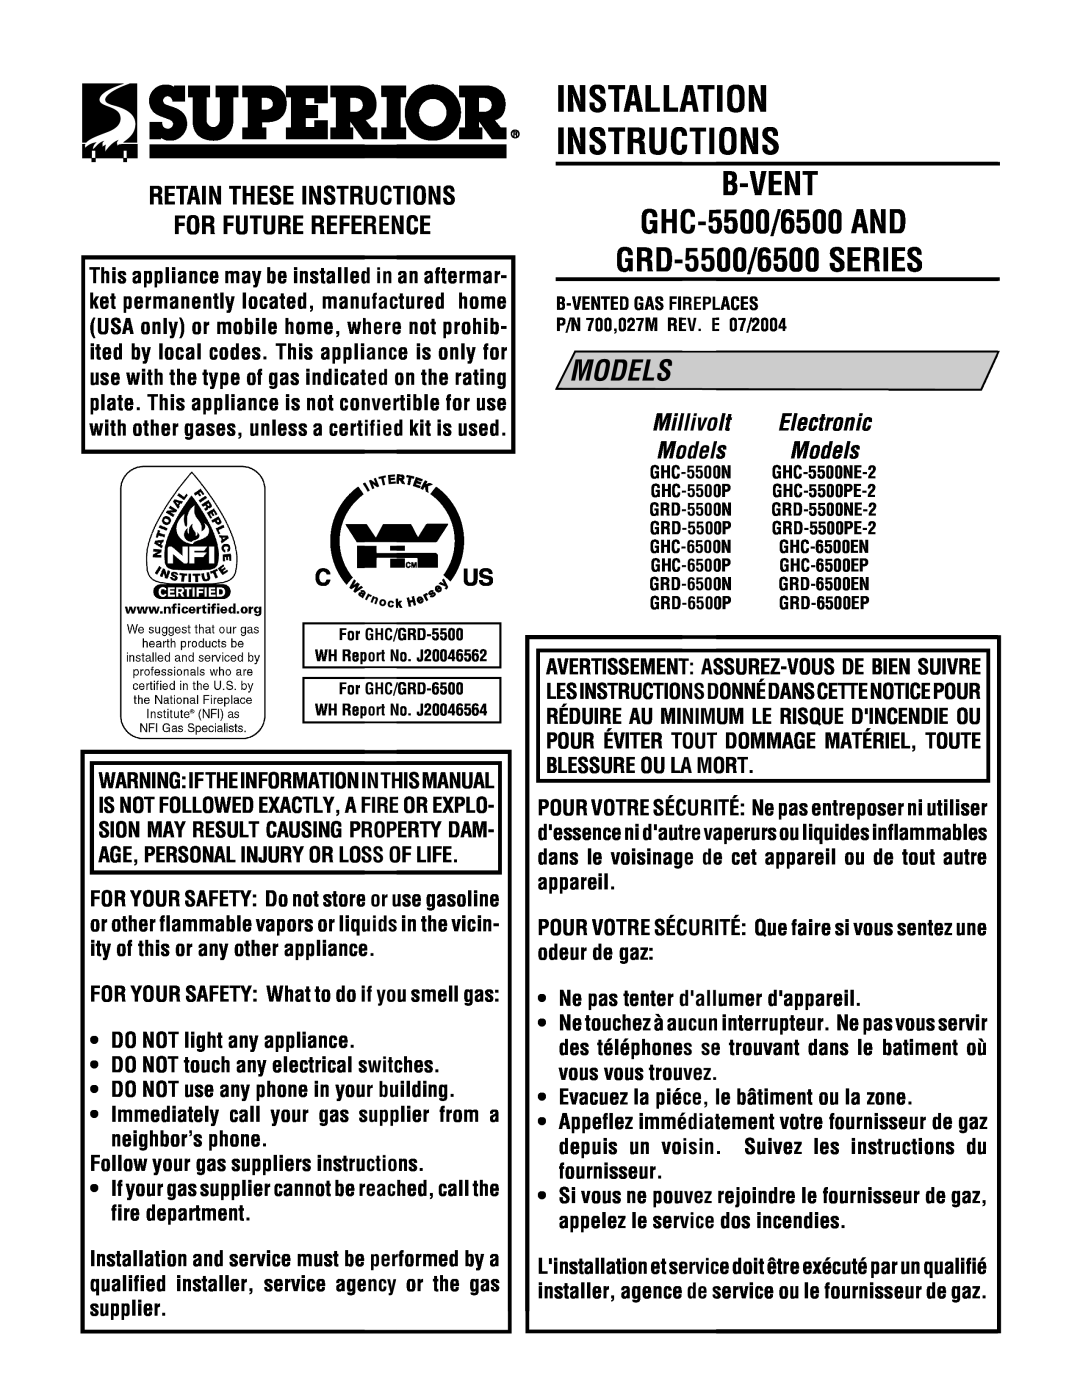 Superior GHC/GRD-5500 installation instructions Installation Instructions, B-VENT GHC-5500/6500AND GRD-5500/6500SERIES 